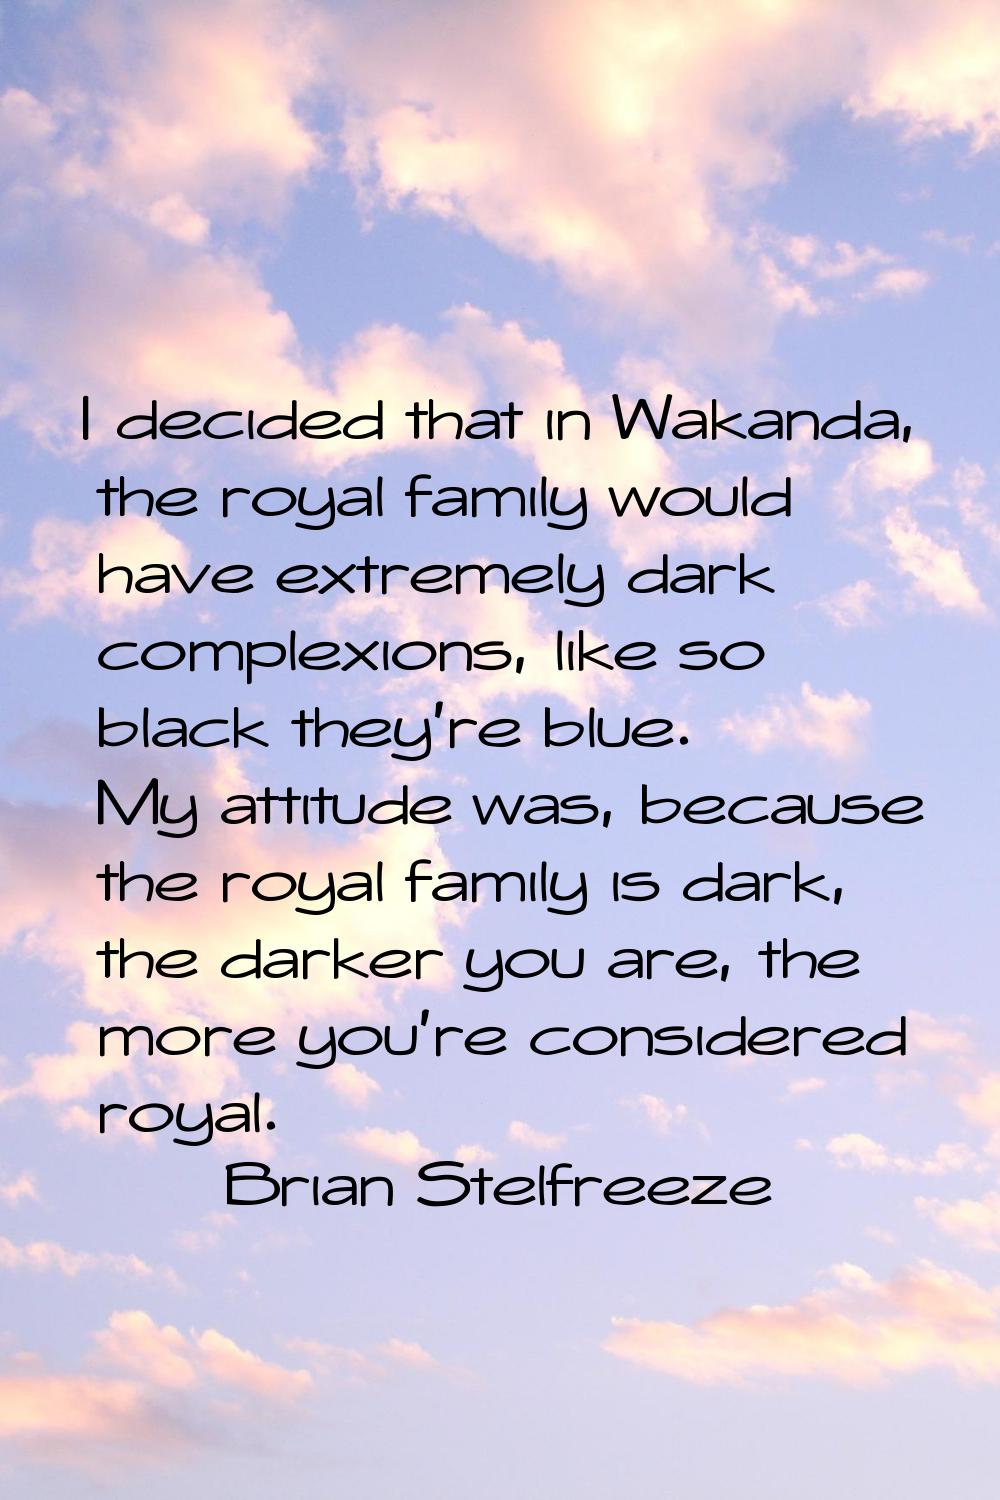 I decided that in Wakanda, the royal family would have extremely dark complexions, like so black th